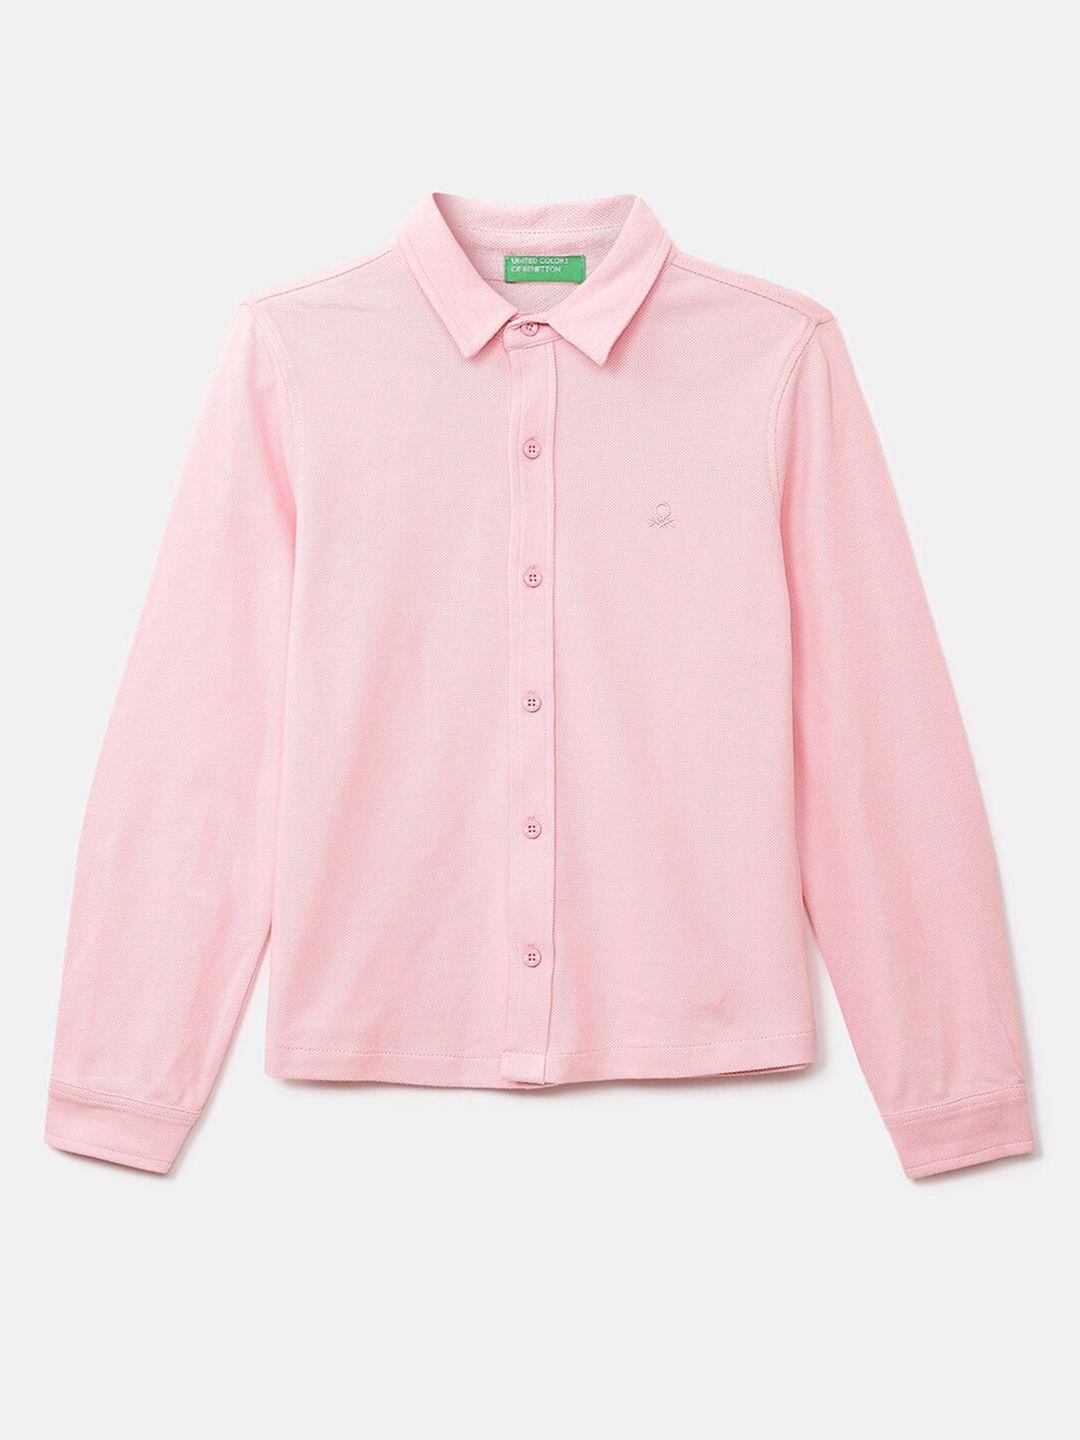 united colors of benetton boys pink regular fit solid casual shirt